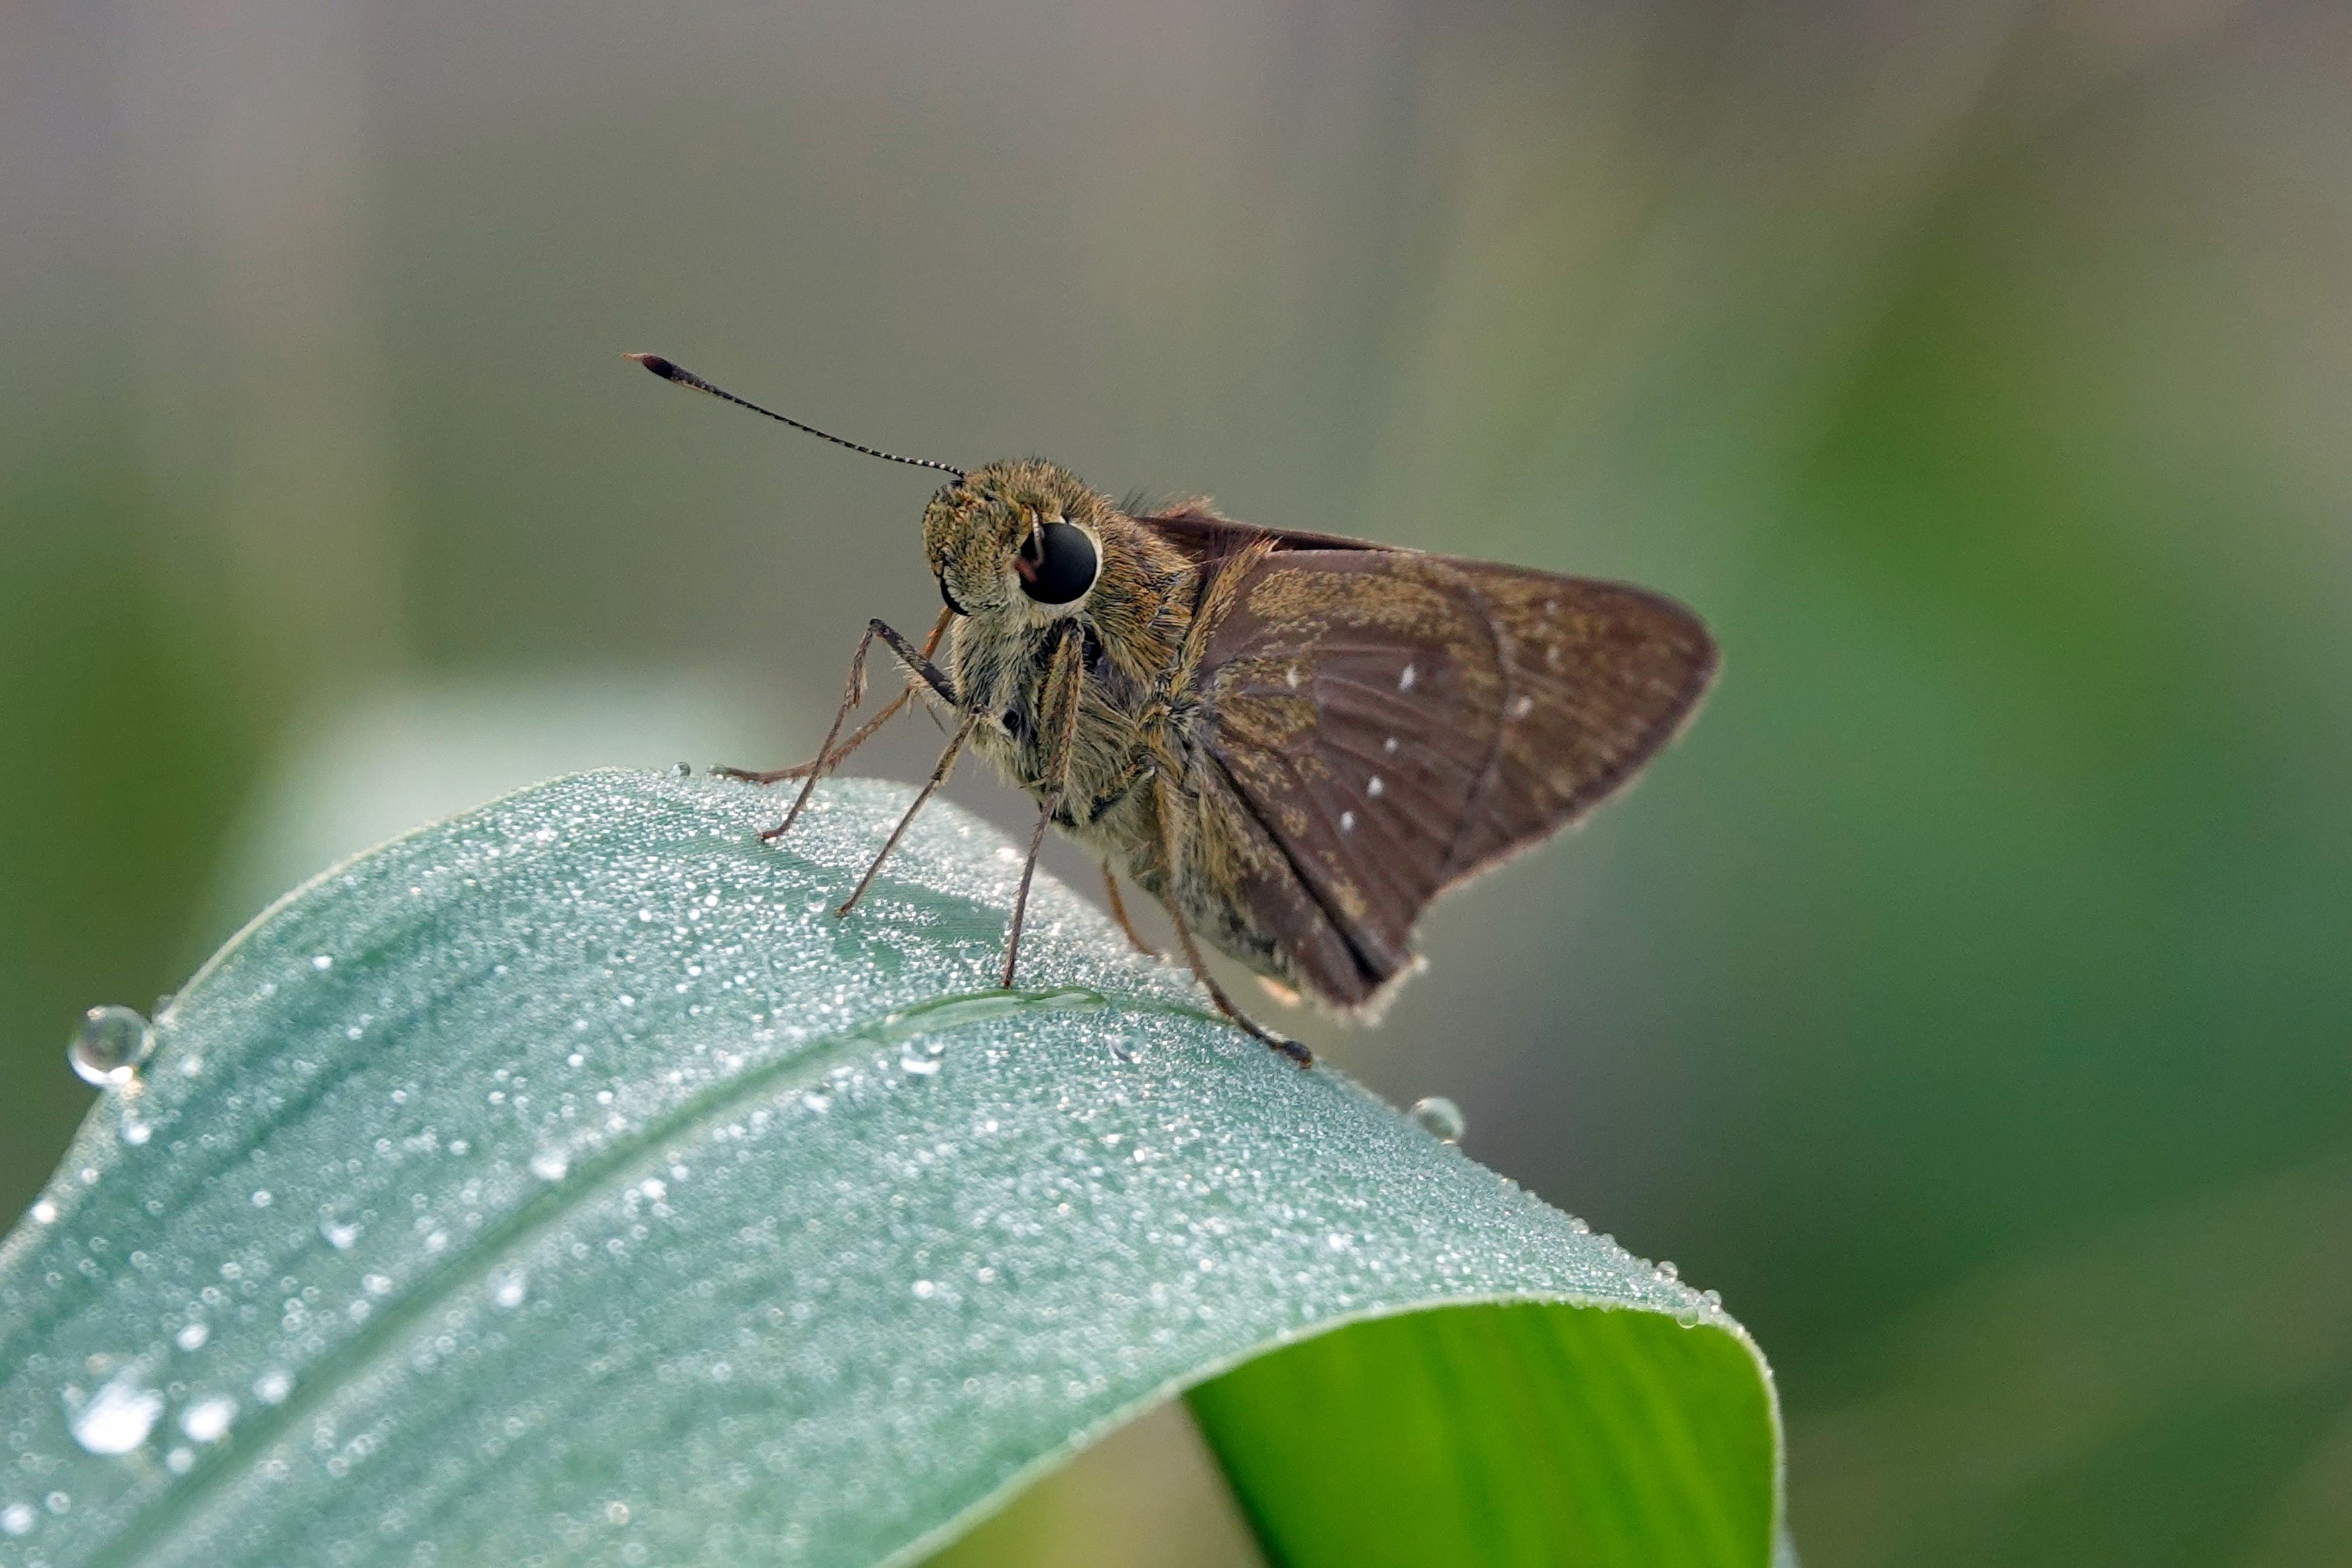 Coconut skipper as a pest explained